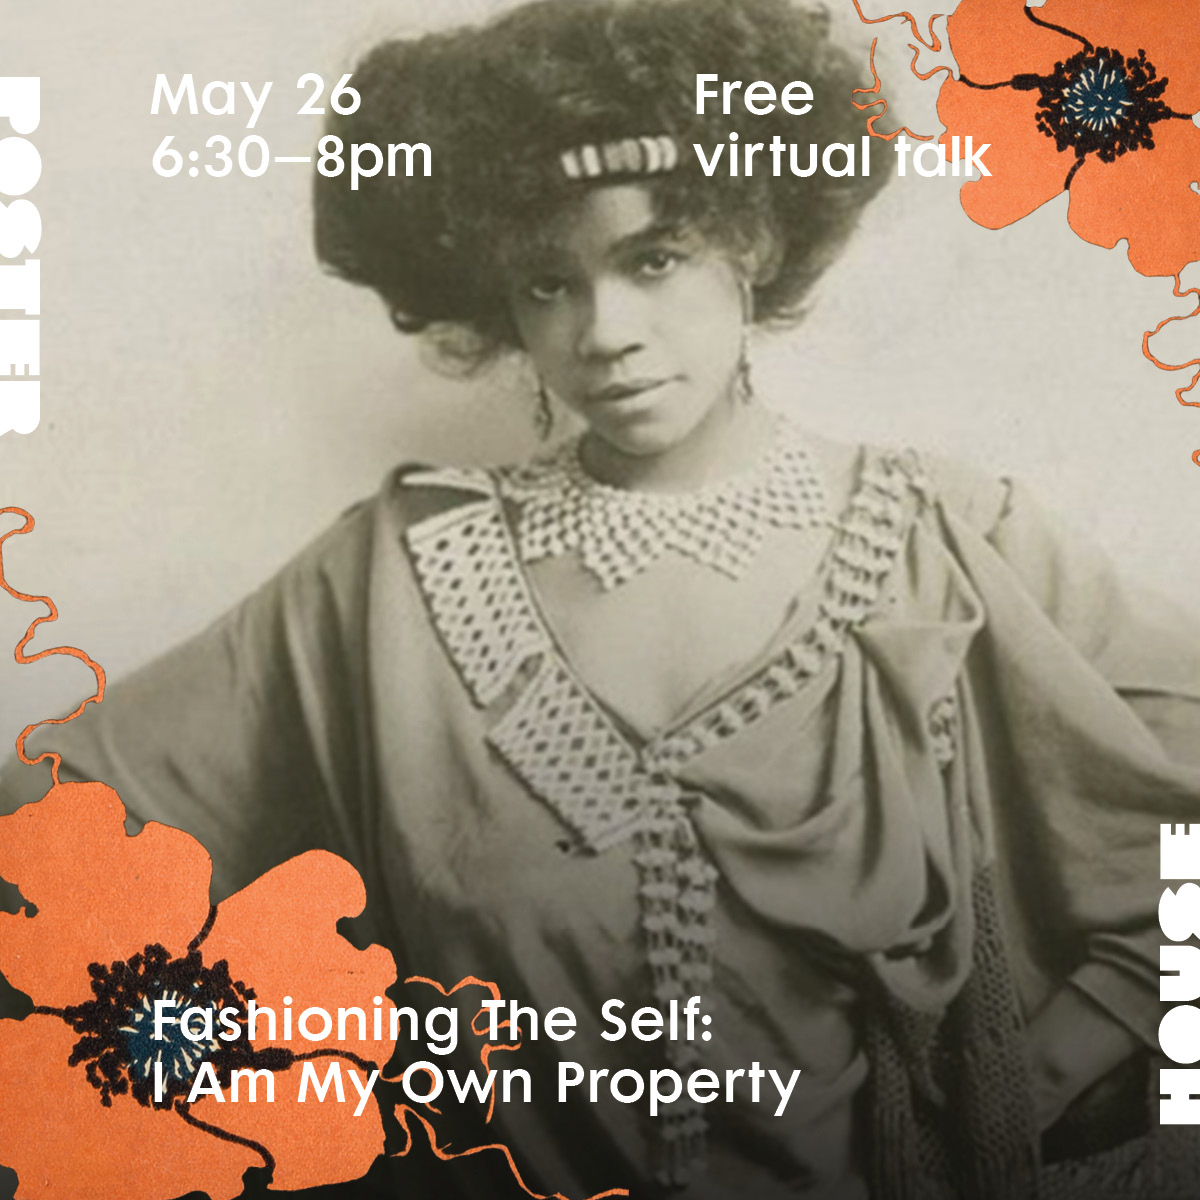 Announcement promoting event featuring Aita Baker in black and white overlaid with illustrated orange poppies. Text reads Poster House May 26 6:30 to 8pm Free virtual talk fashioning the self: I am my own property.